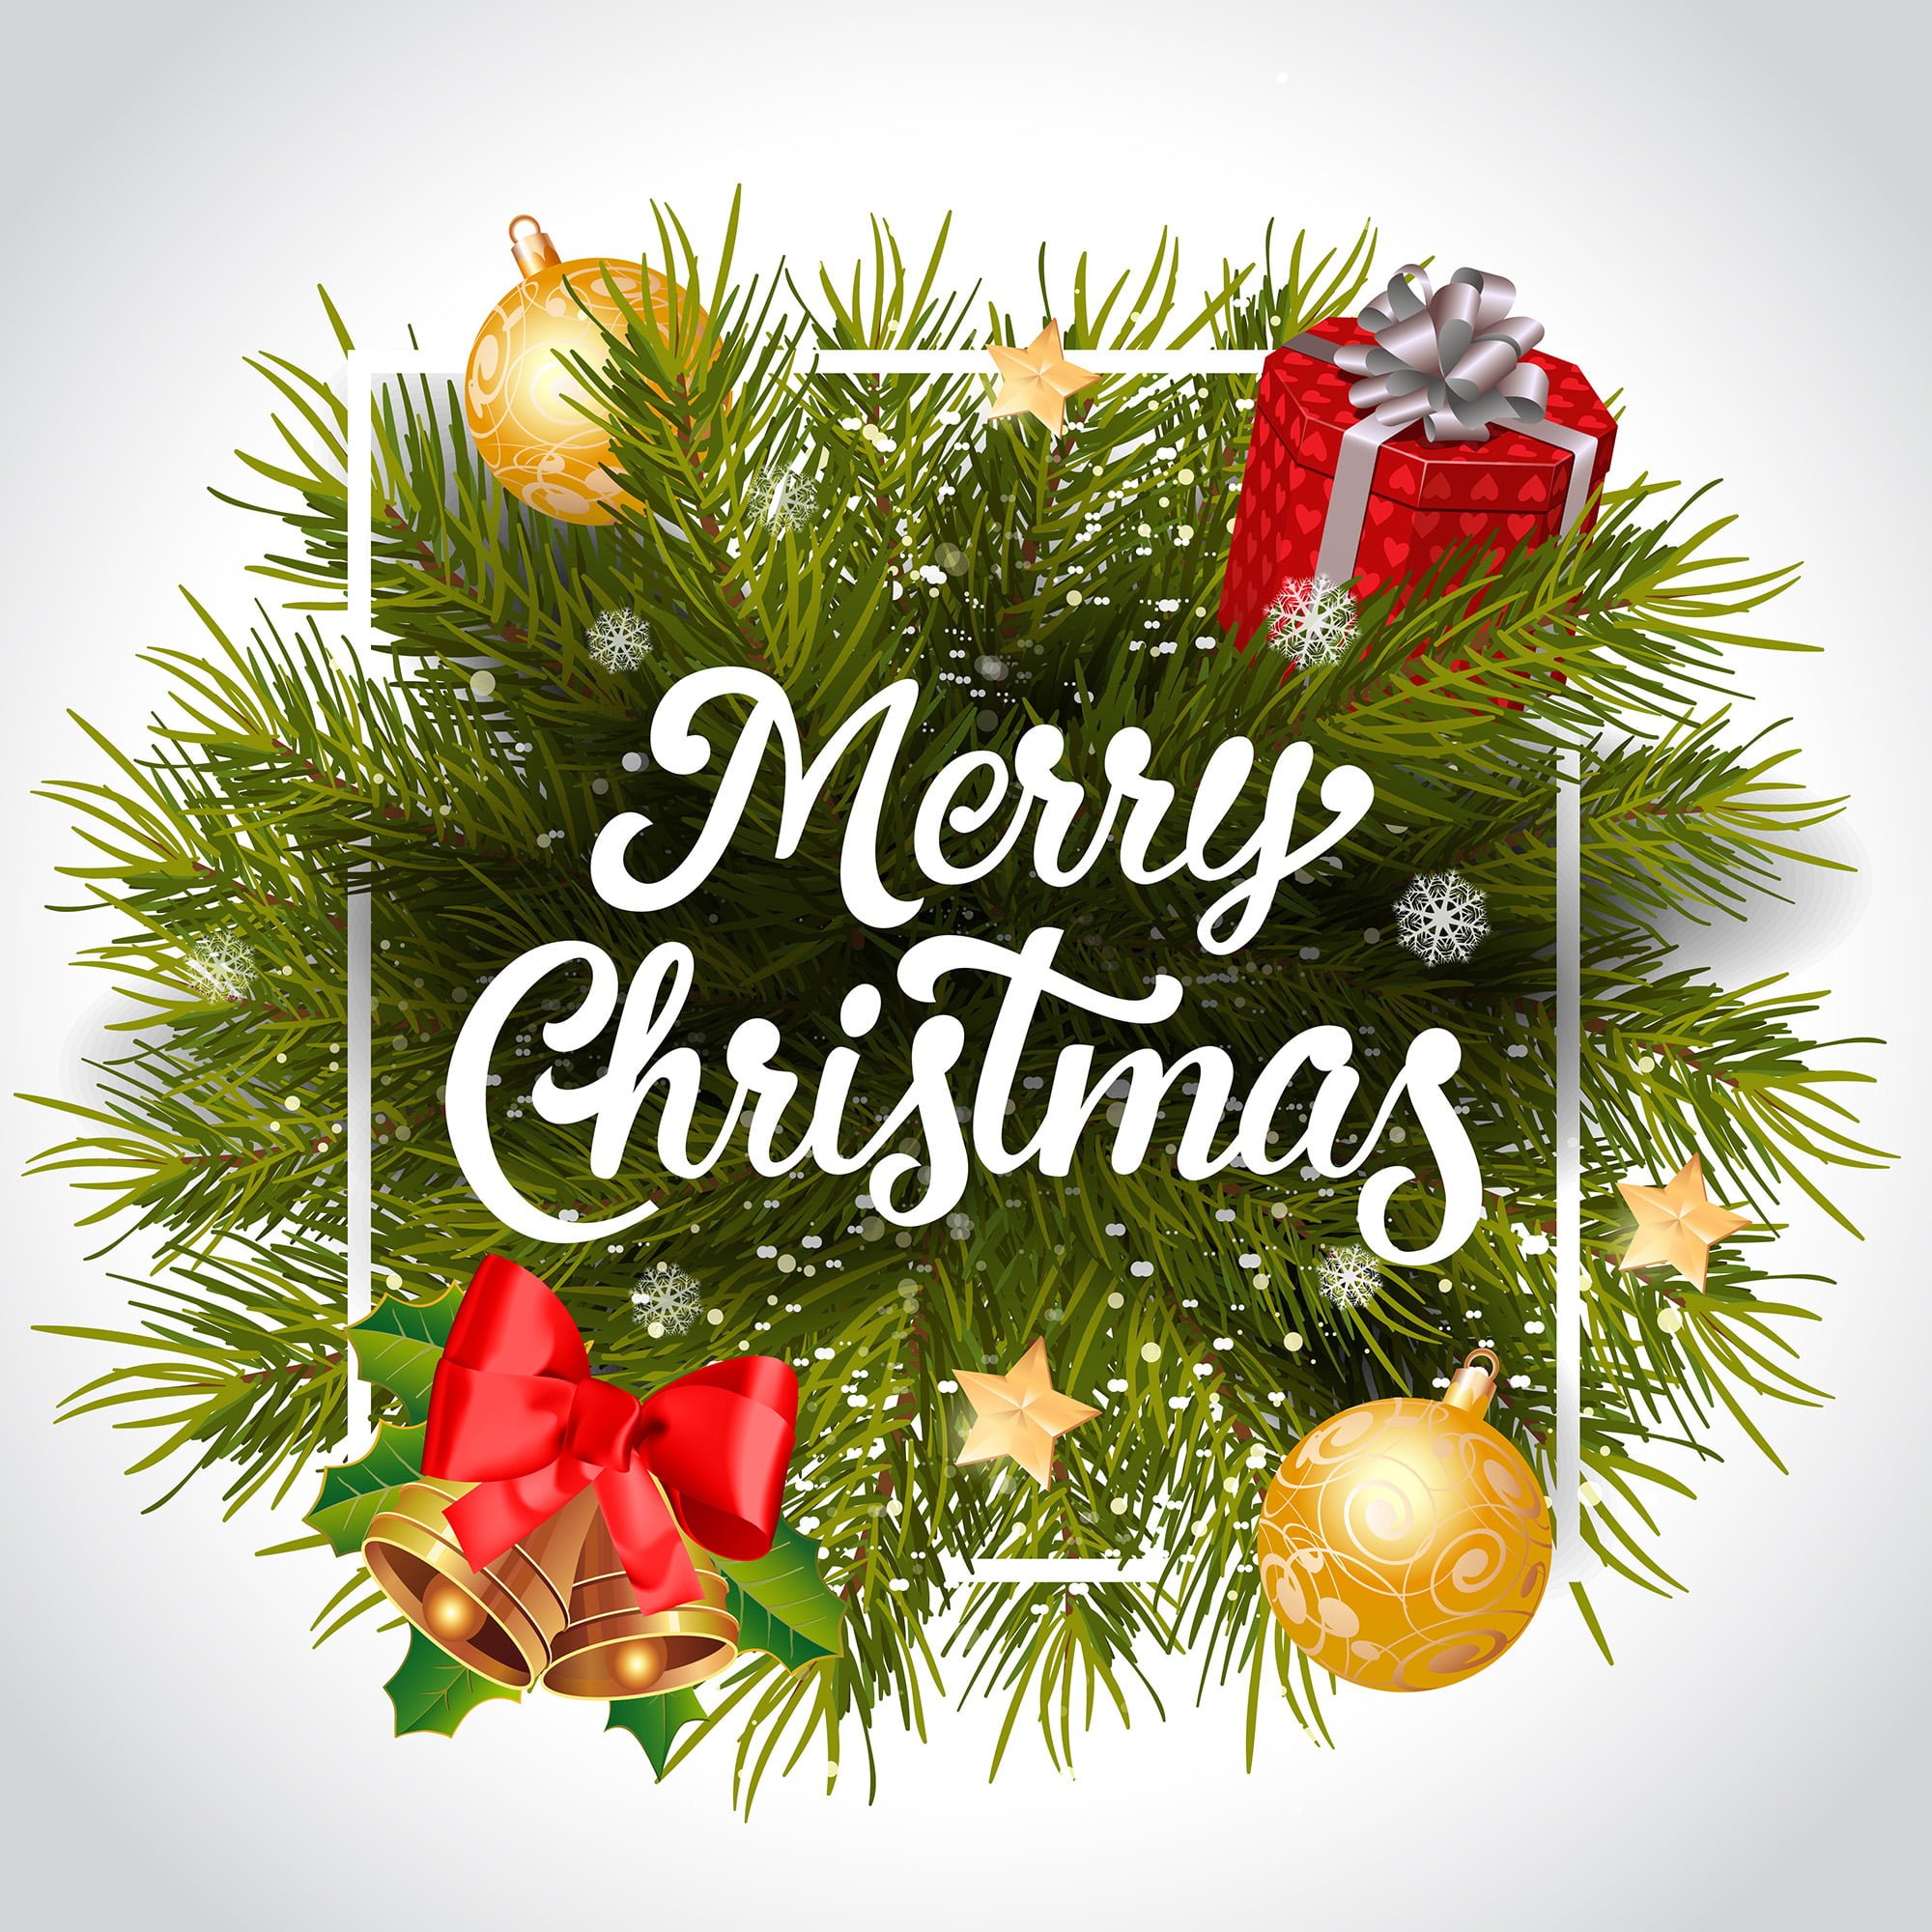 Merry Christmas Images For WhatsApp